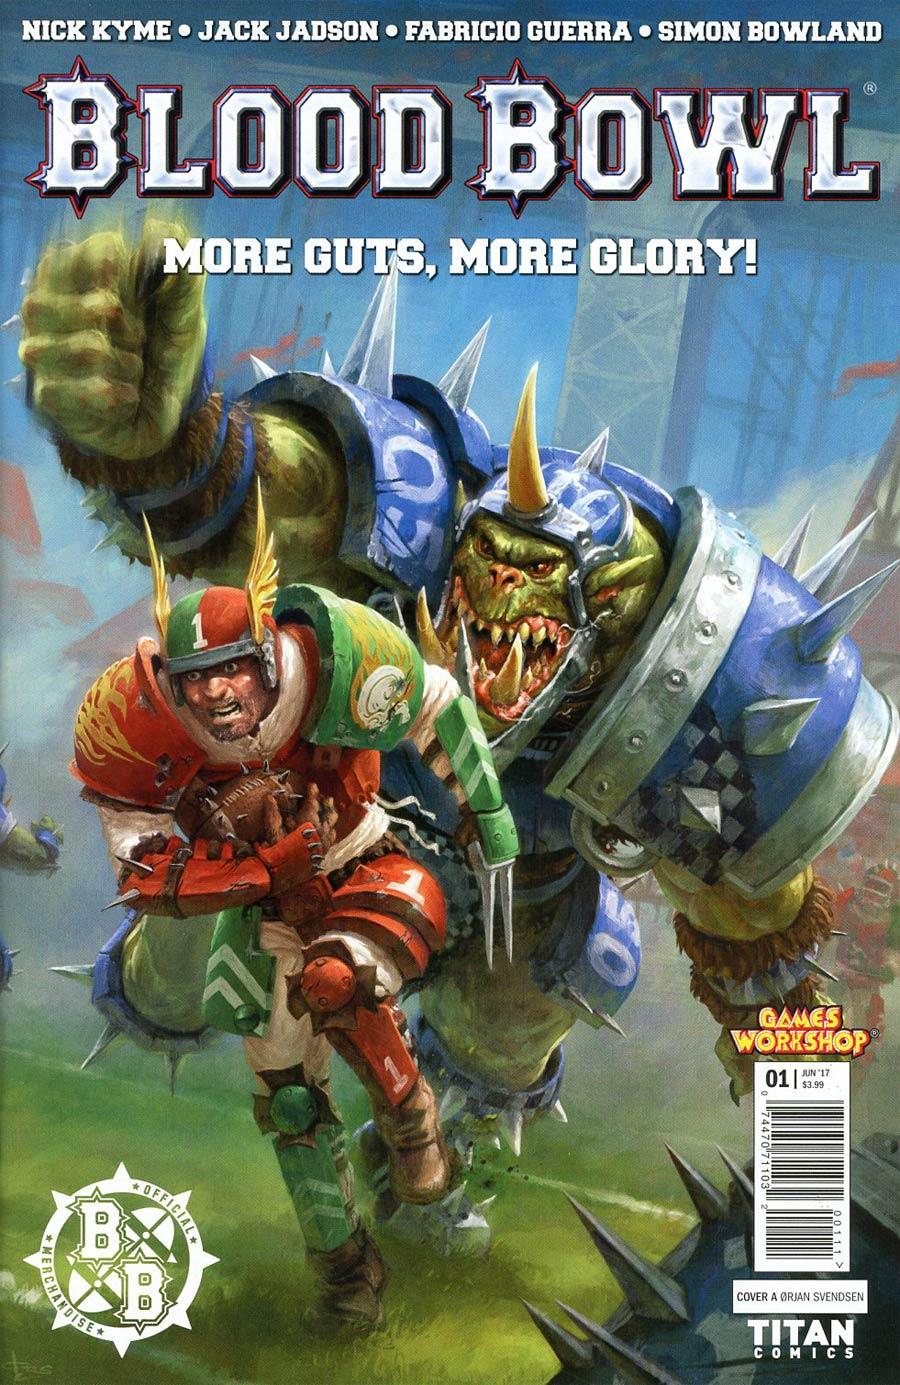 Blood Bowl More Guts More Glory Vol. 1 #1